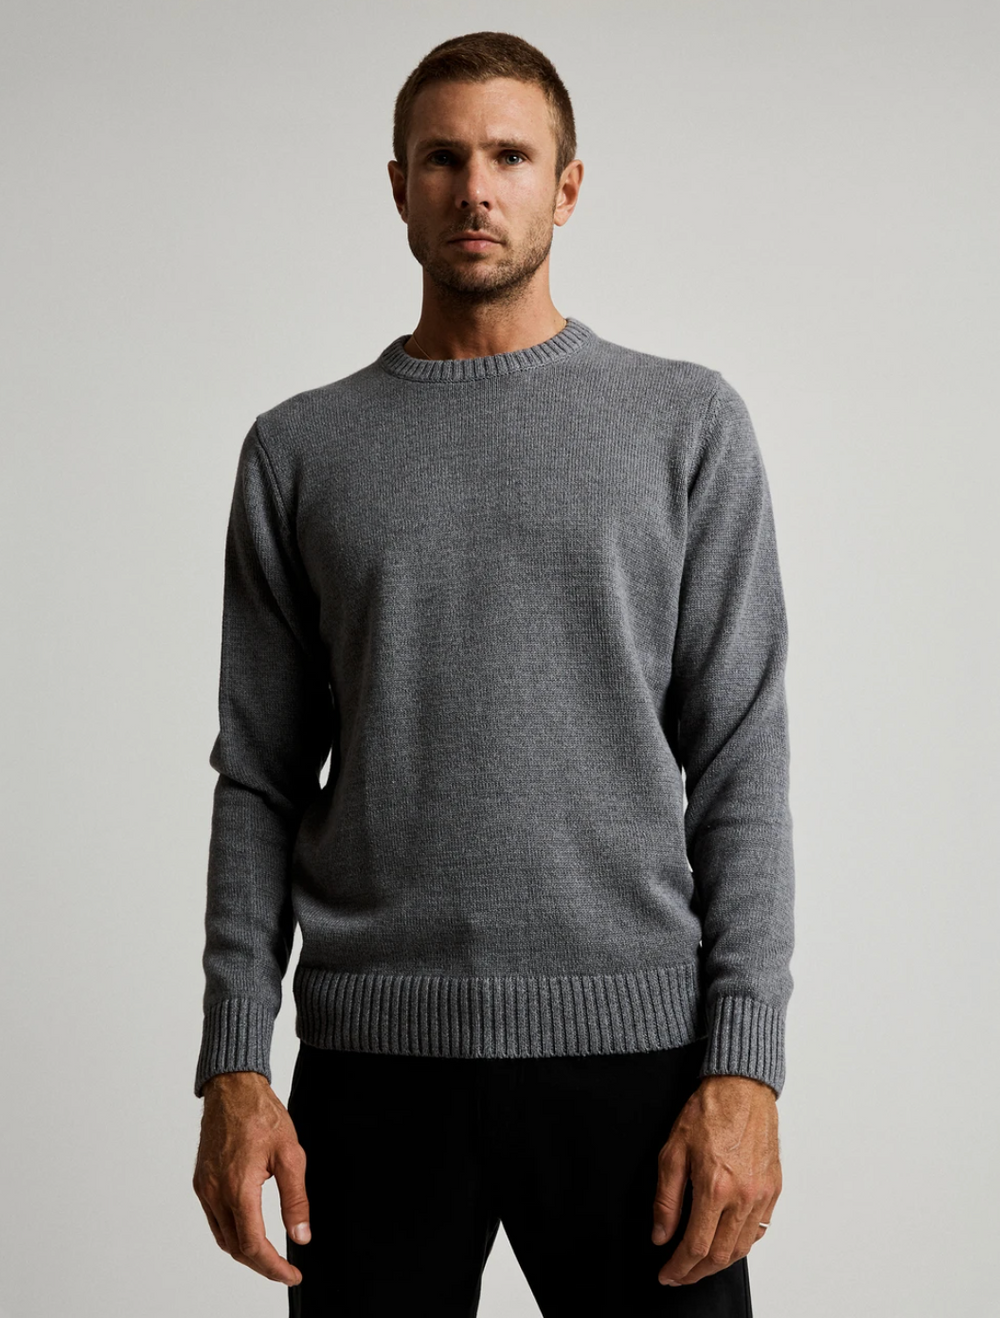 Mr Simple Standard Knit / Grey Marle | Buster McGee Daylesford